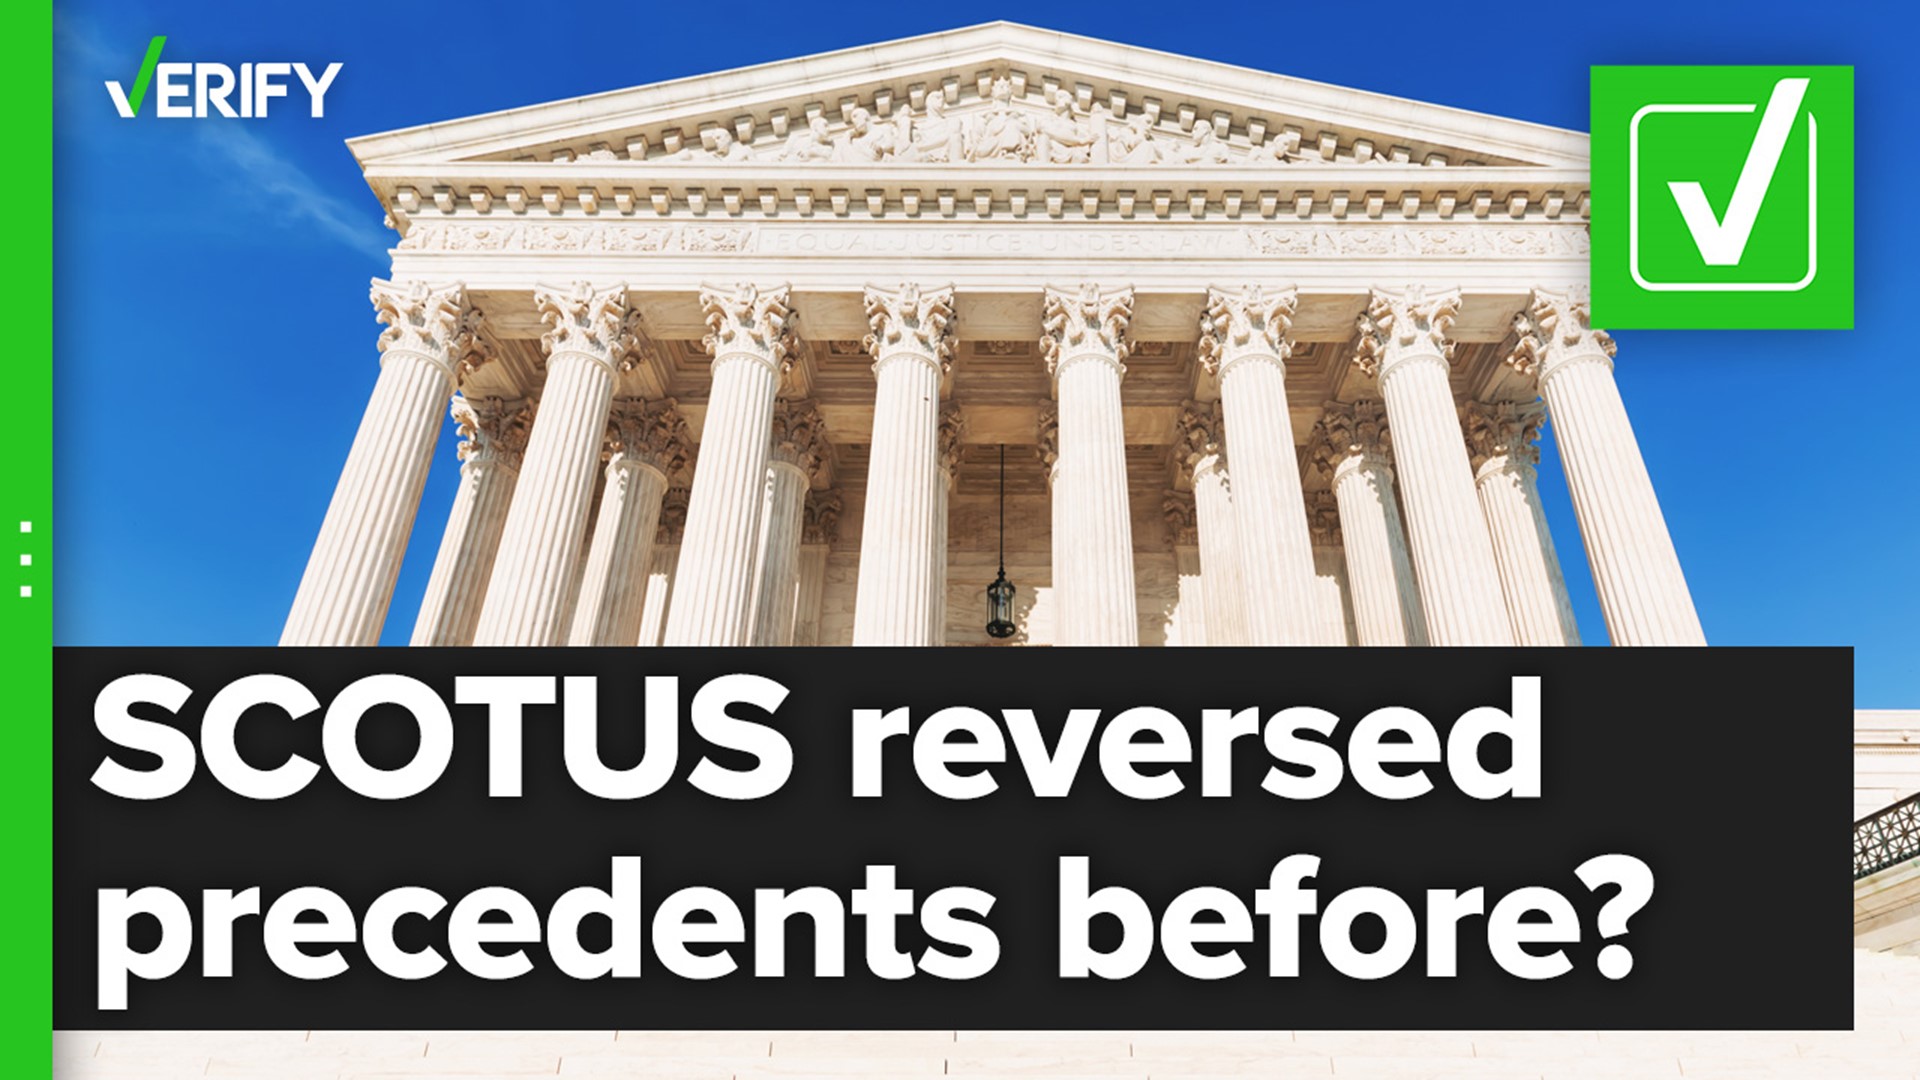 According to historical records, the Supreme Court has overturned more than 100 decisions to set new precedents.